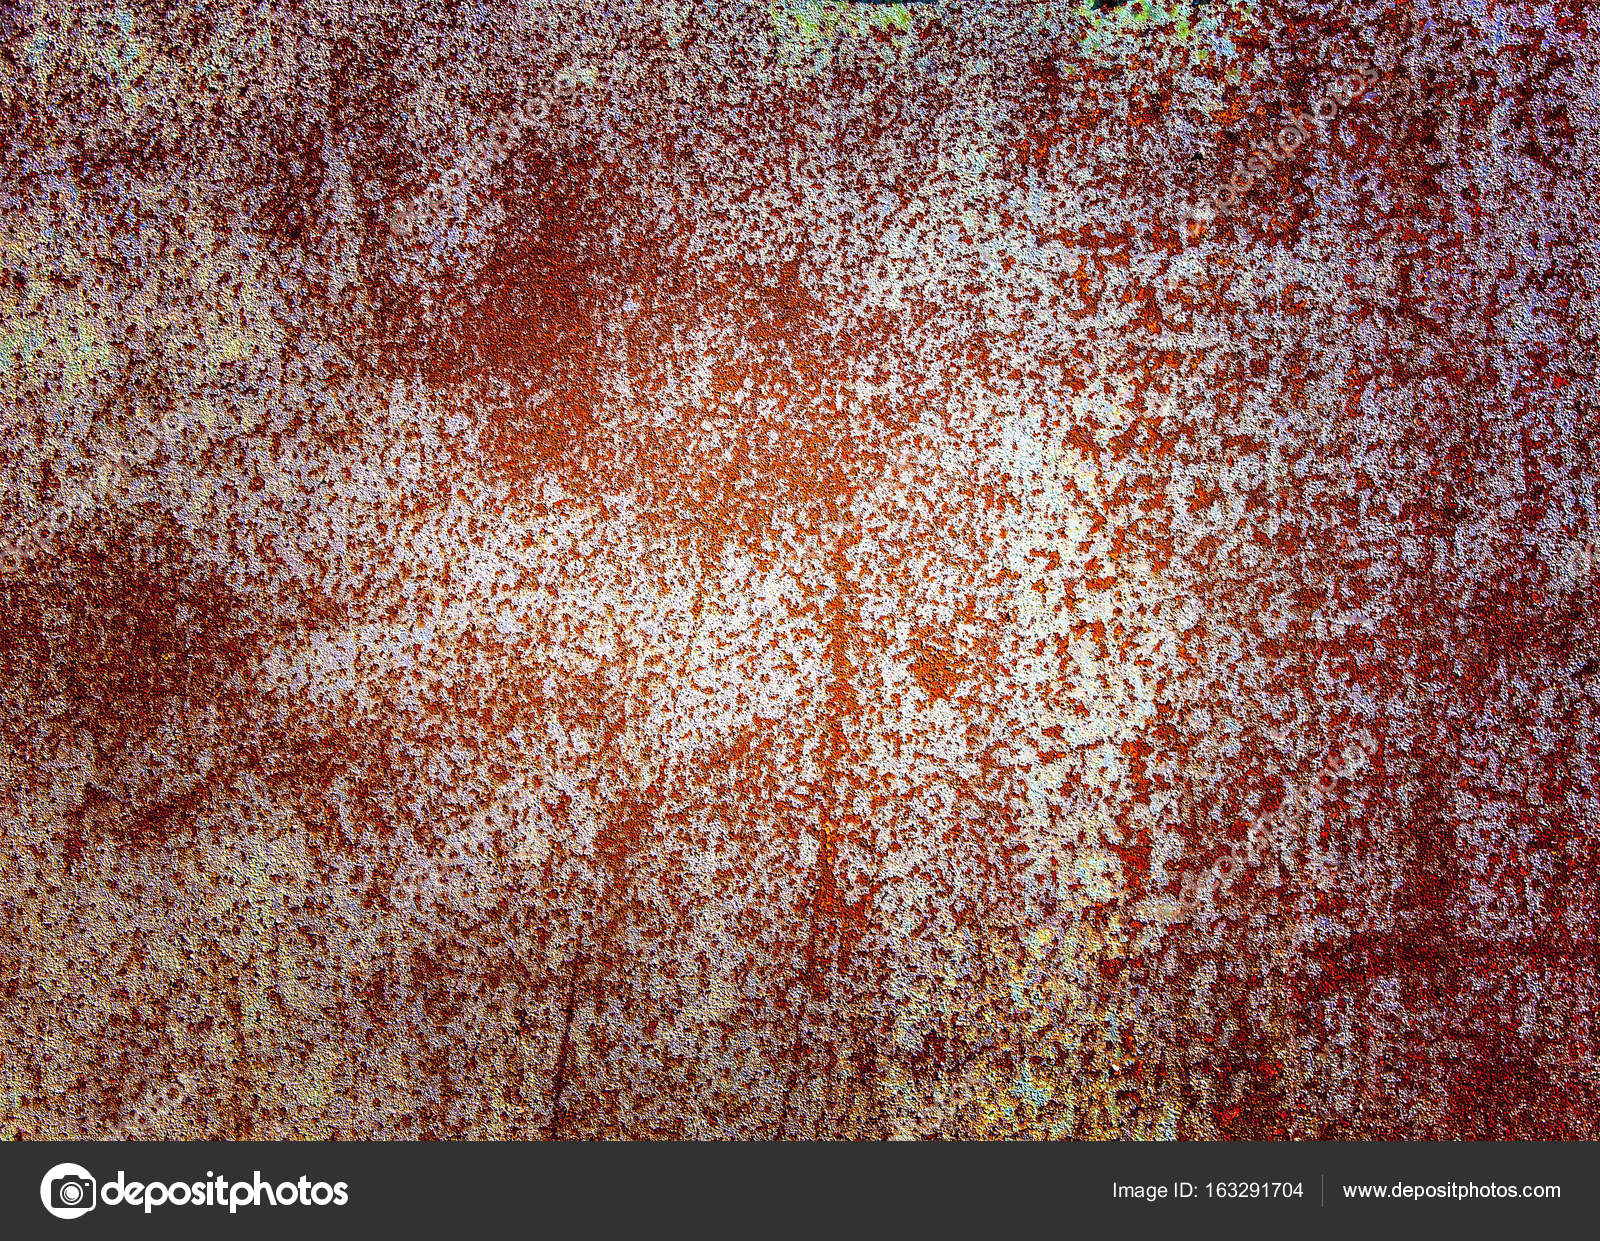 Old Rusted metal texture. — Stock Photo © bborriss.67 #163291704